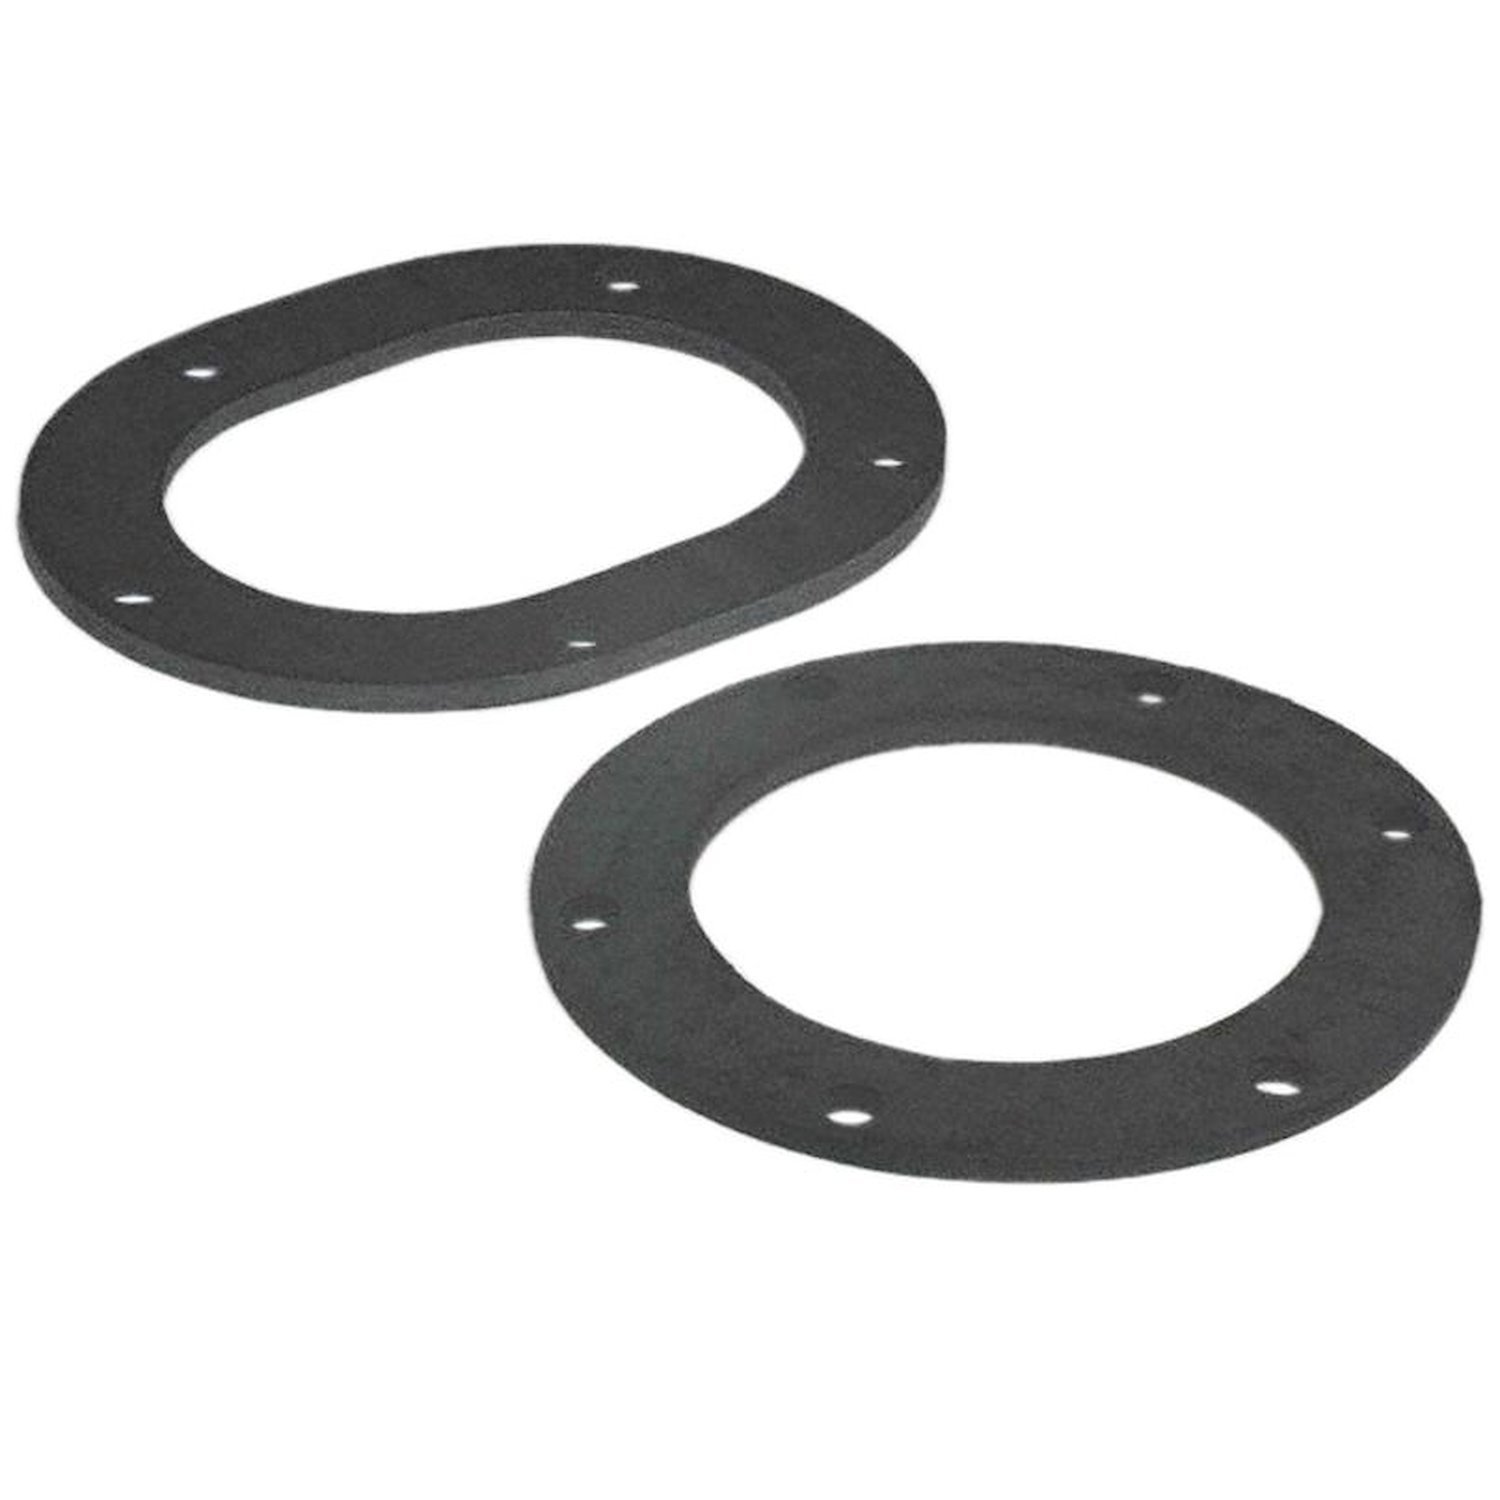 Fuel Pump Tank Seal for 1985-1986 Toyota Camry/1985-1995 Toyota Camry